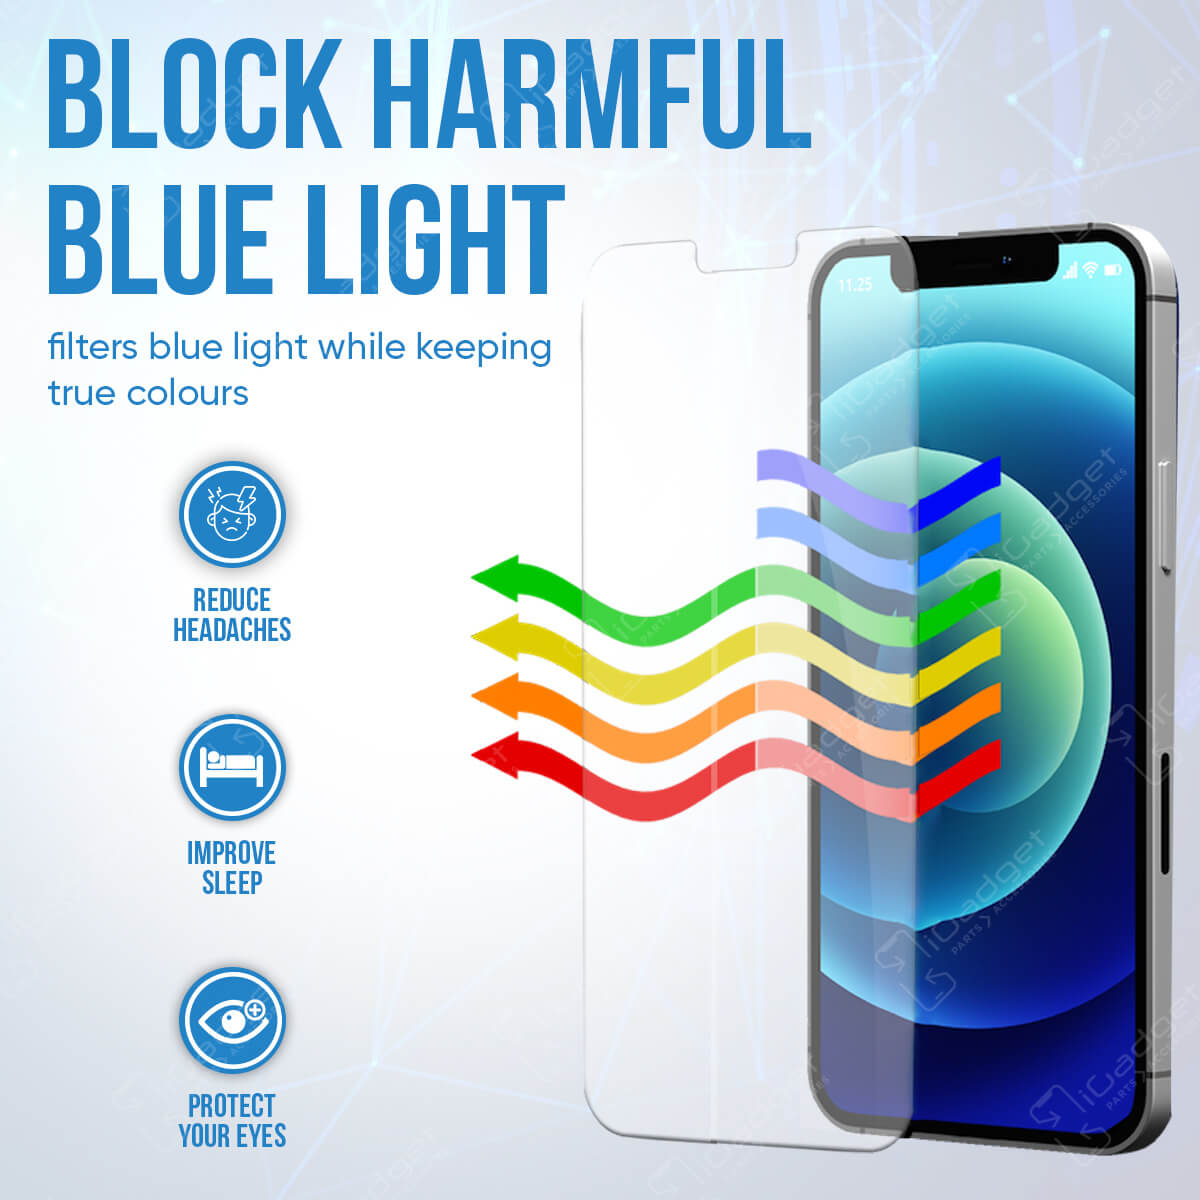 iPhone XS Max/iPhone 11 Pro Max Screen Protector Blue Light Filter | Case Friendly Glass